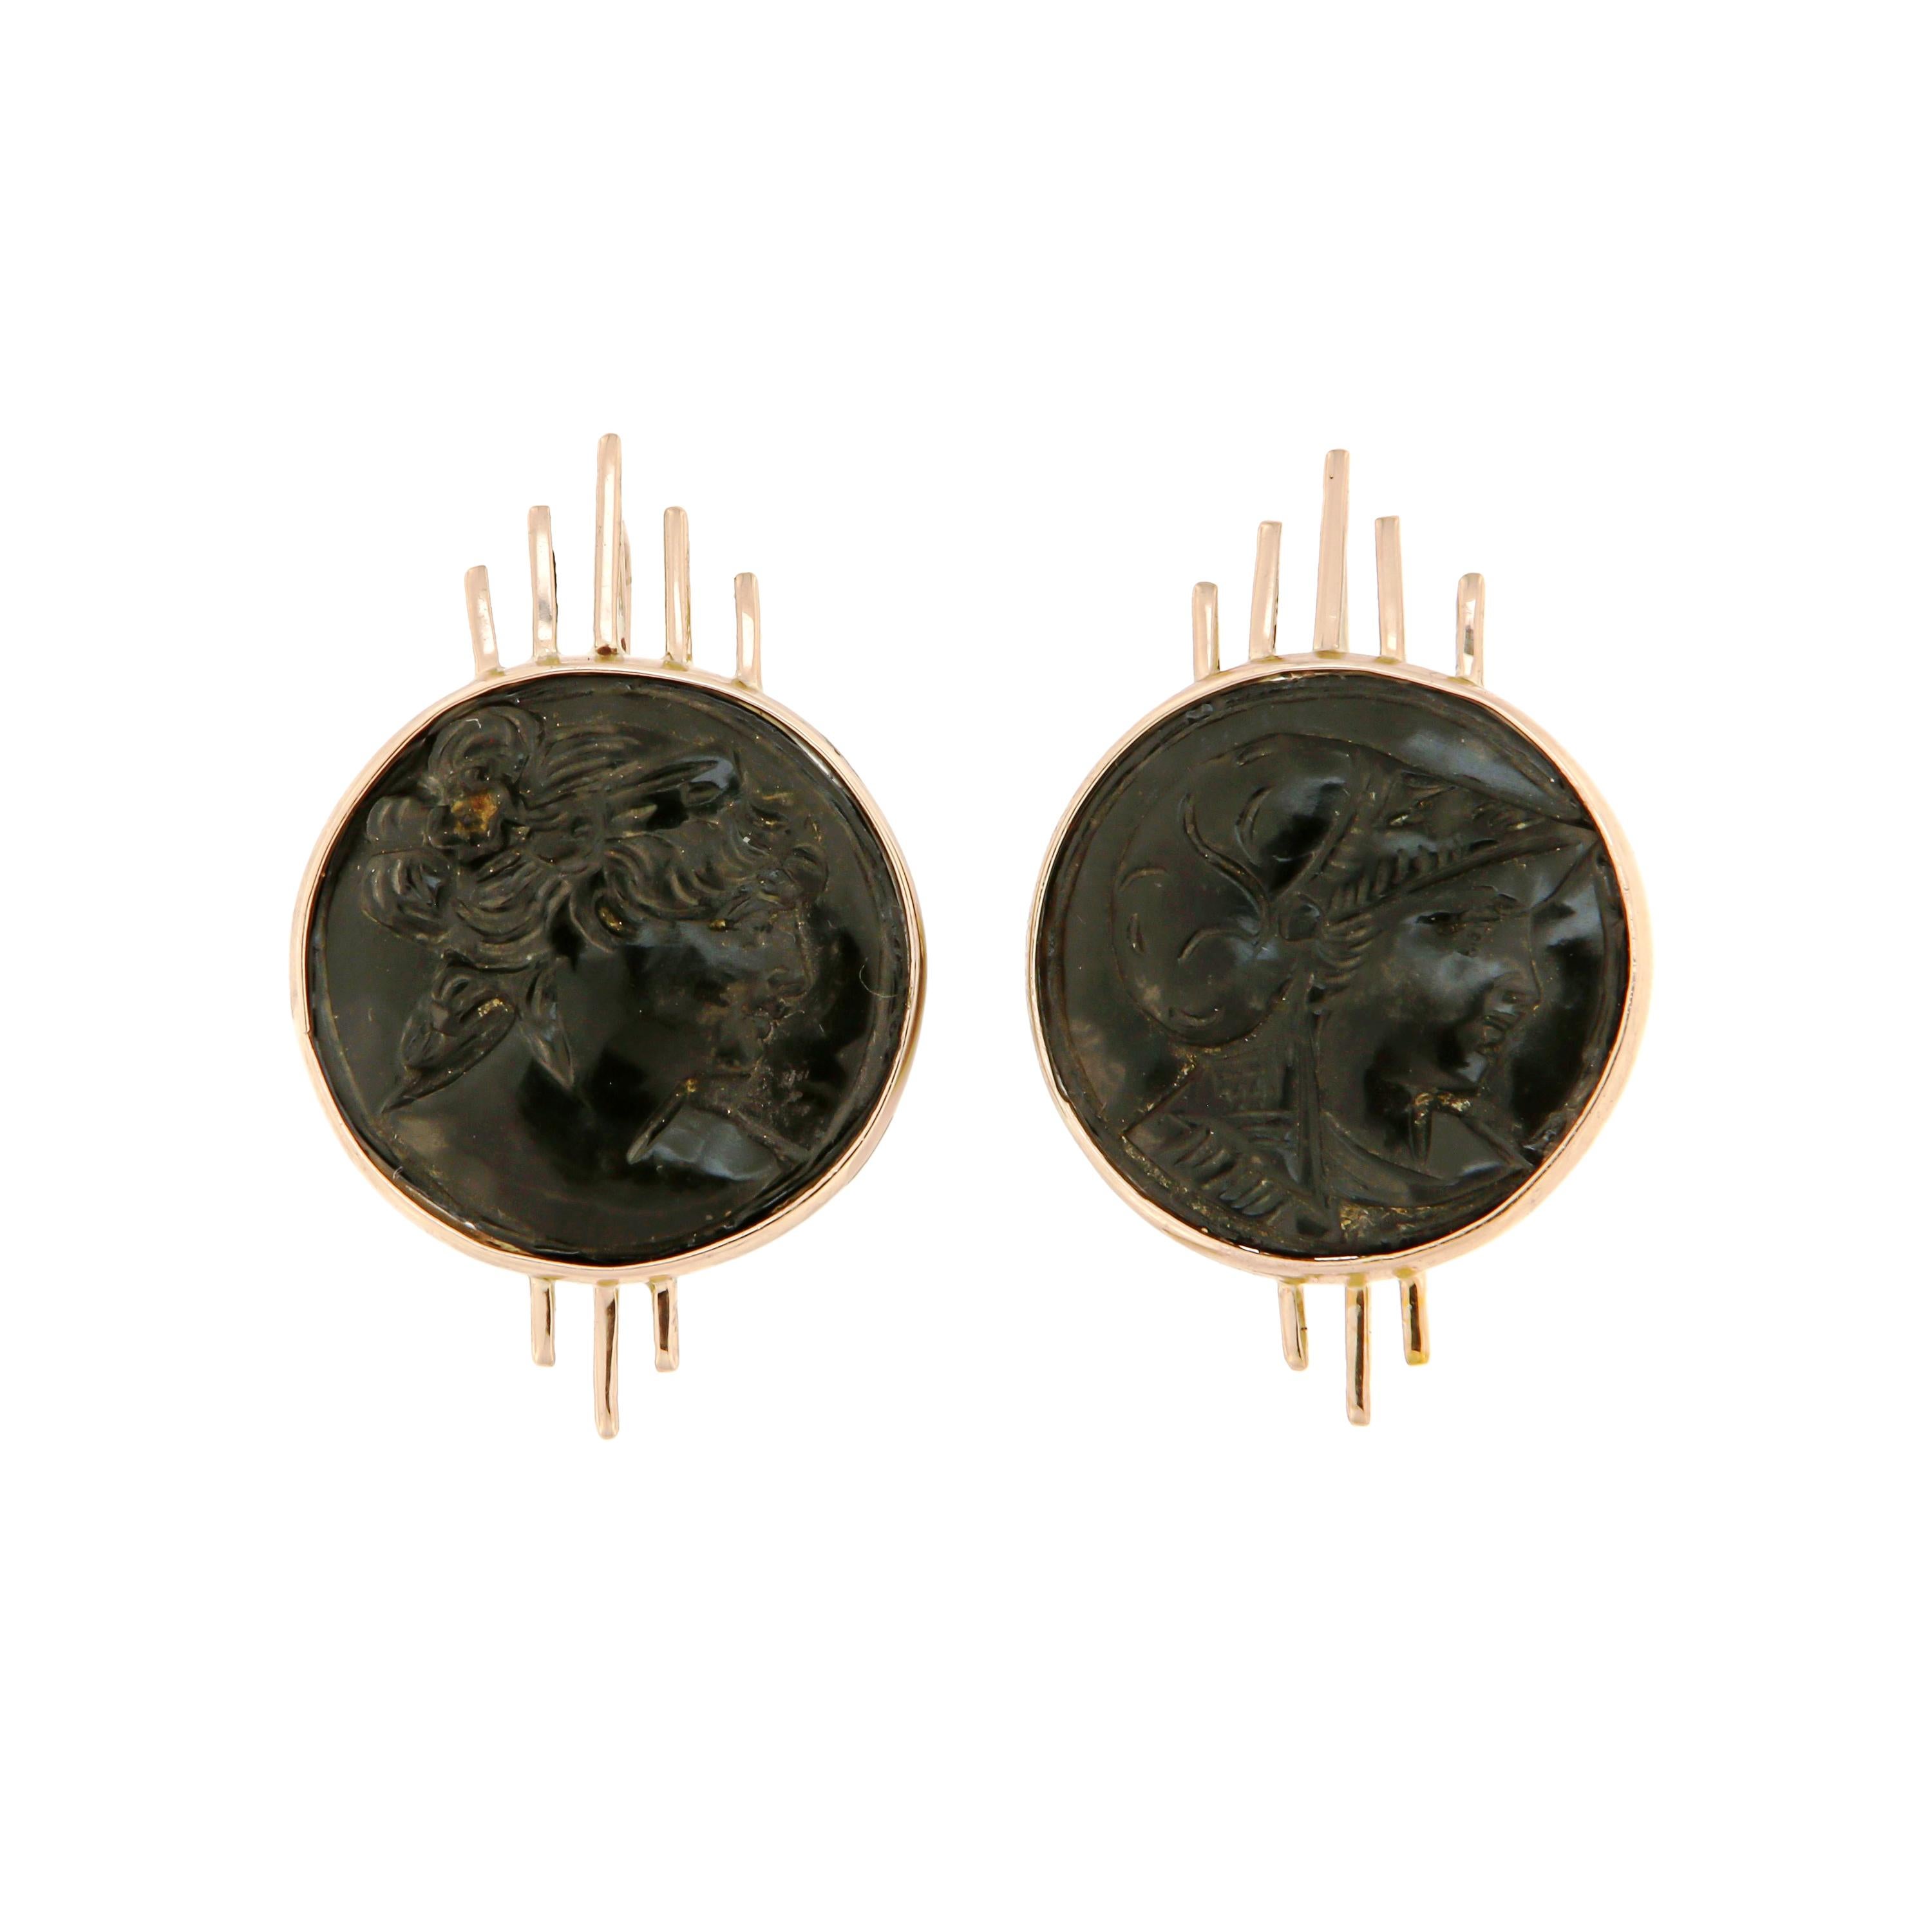 Black Cameo Rose Gold Earrings Handcrafted in Italy by Botta Gioielli